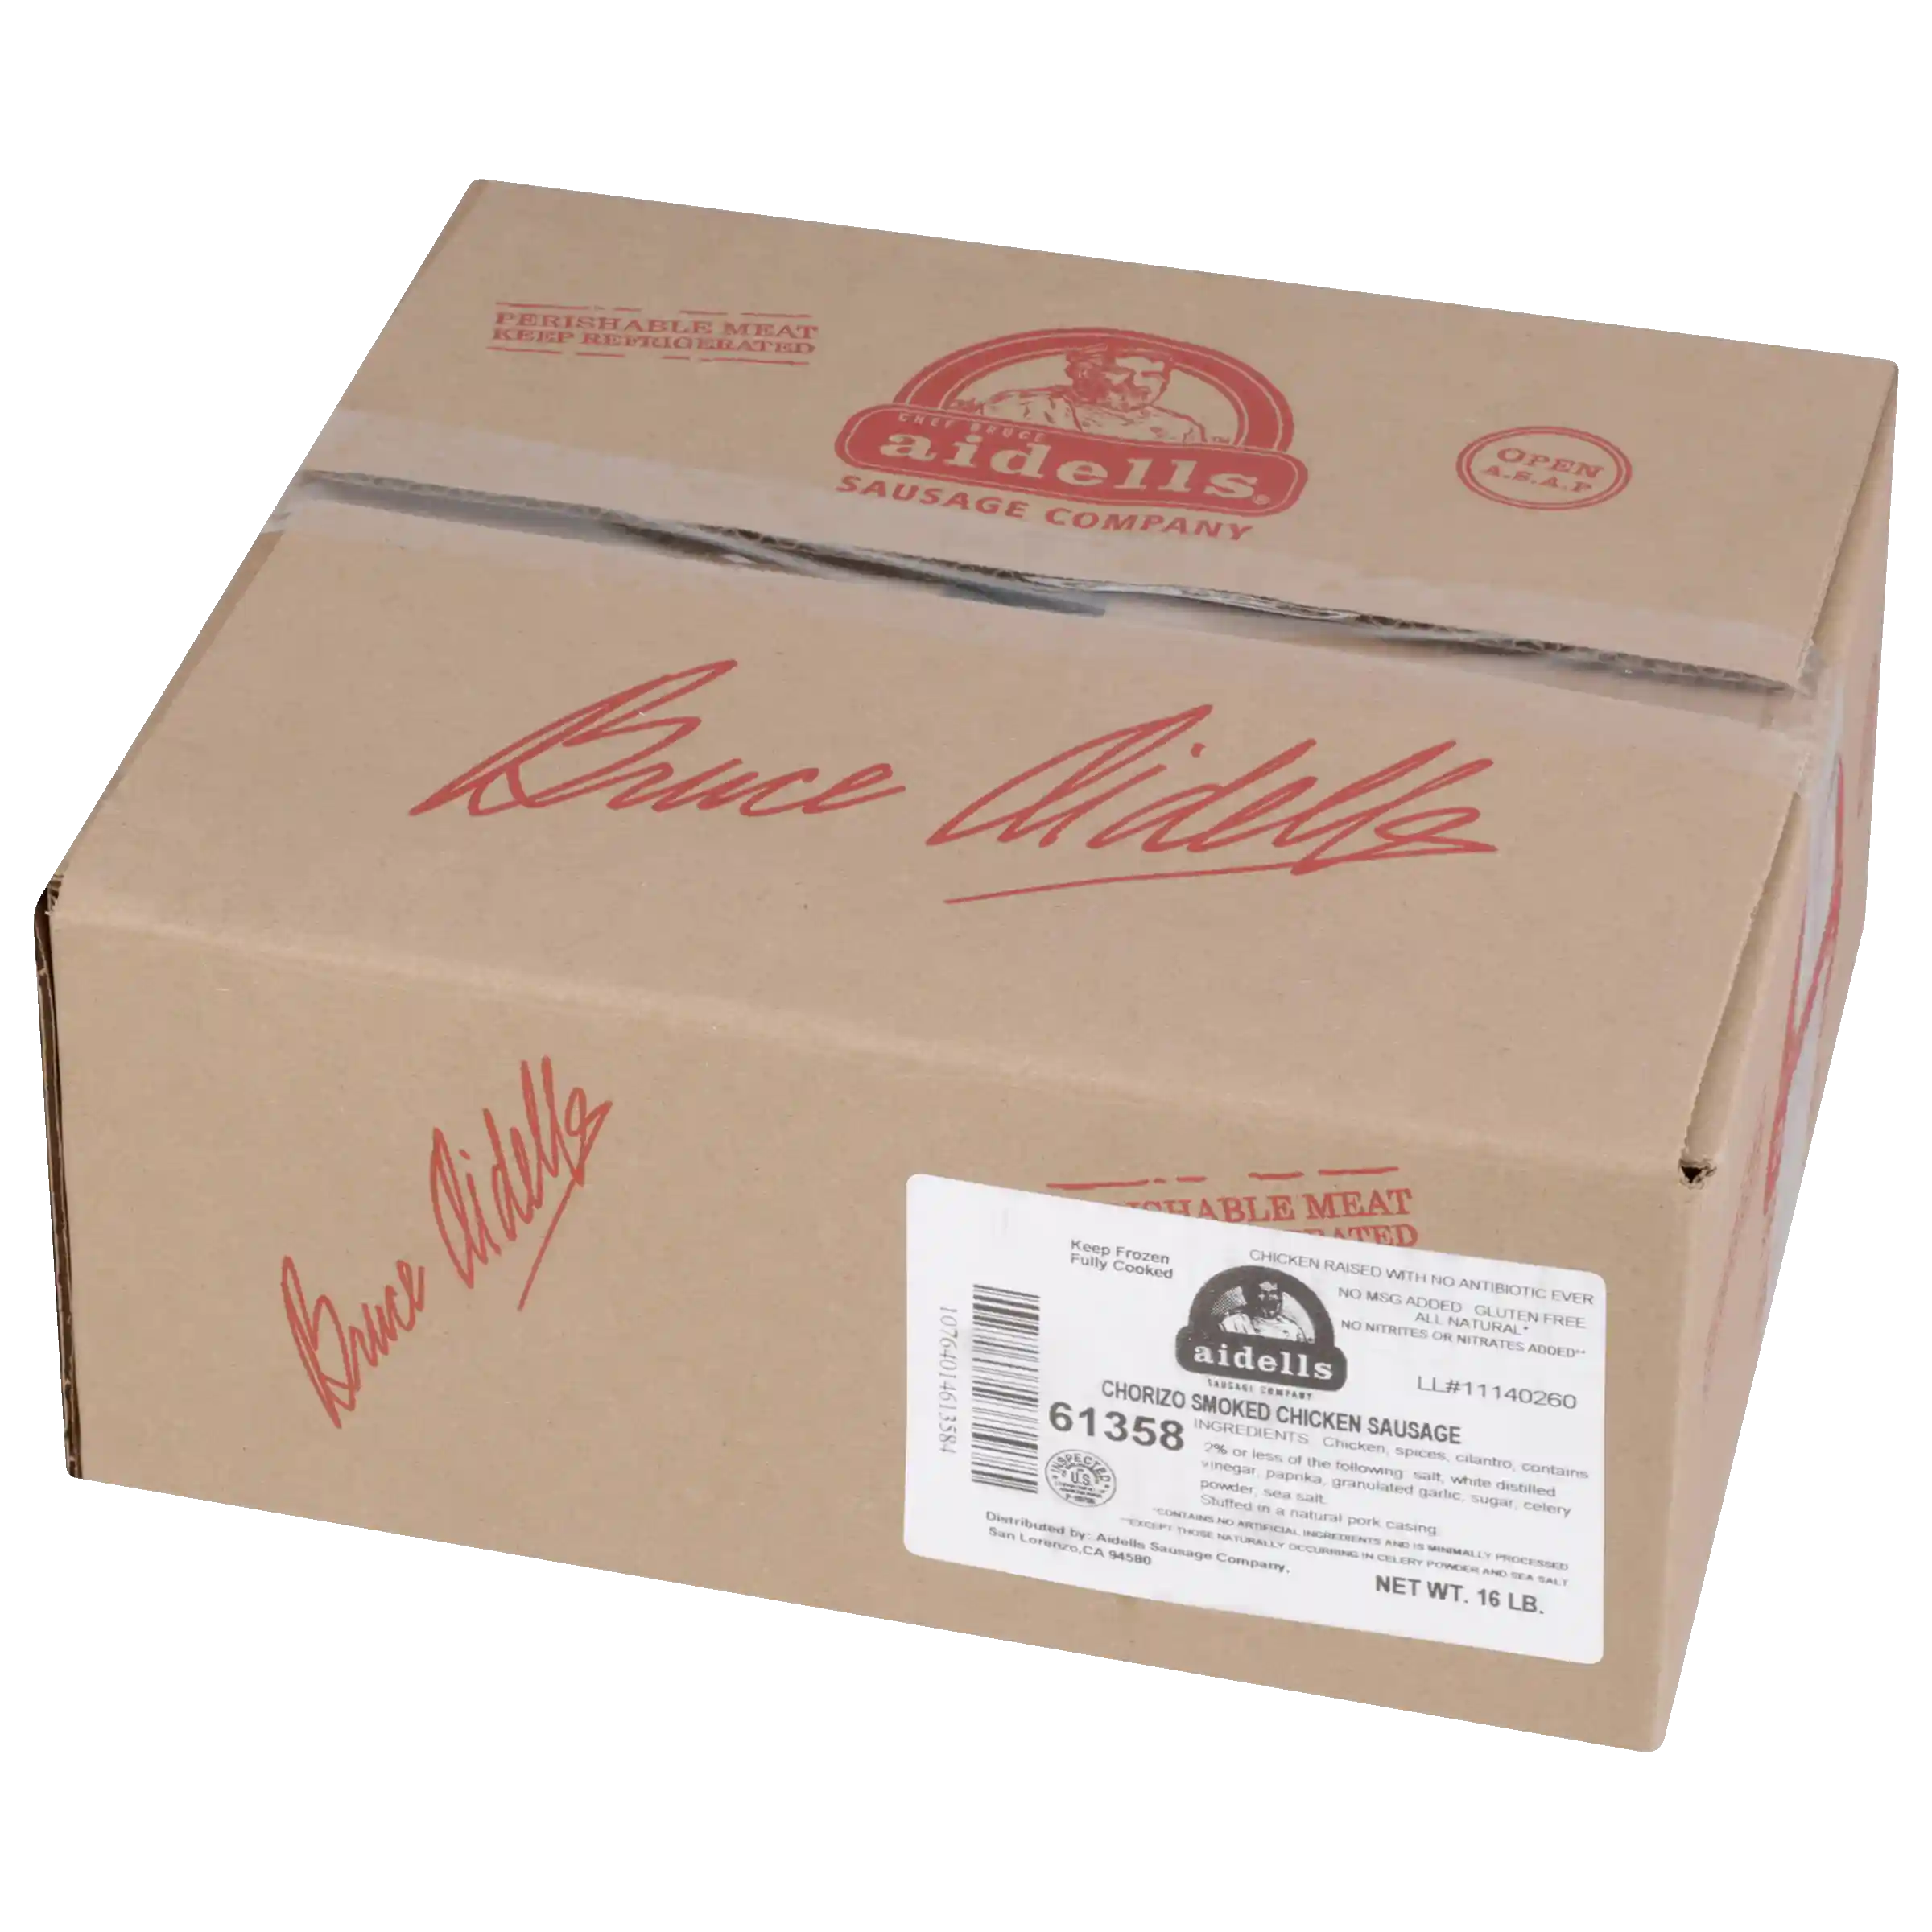 Aidells® Fully Cooked Smoked Chorizo Chicken Sausage Links, 4 oz, 64 Links per Case, 16 Lbs, Frozen_image_41